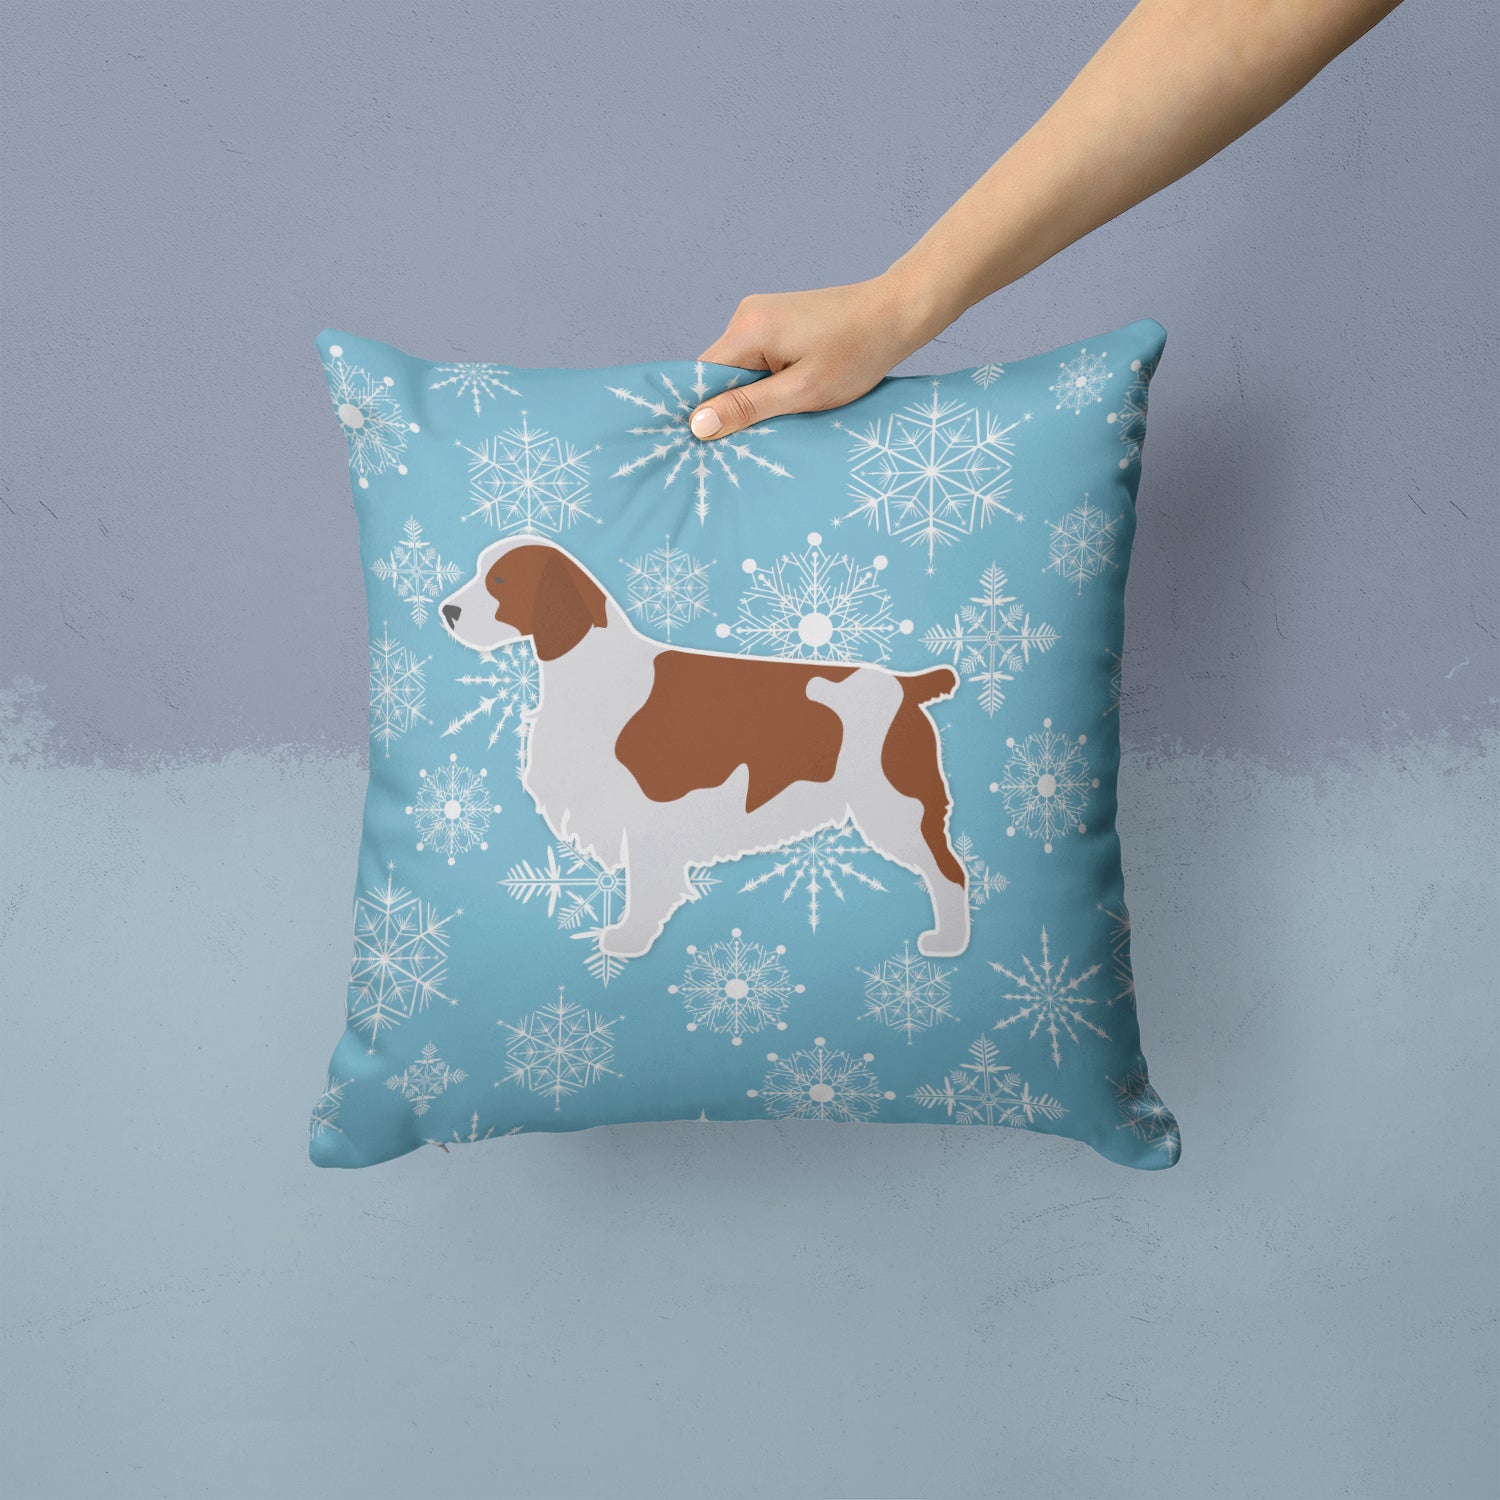 Winter Snowflake Welsh Springer Spaniel Fabric Decorative Pillow BB3500PW1414 - the-store.com